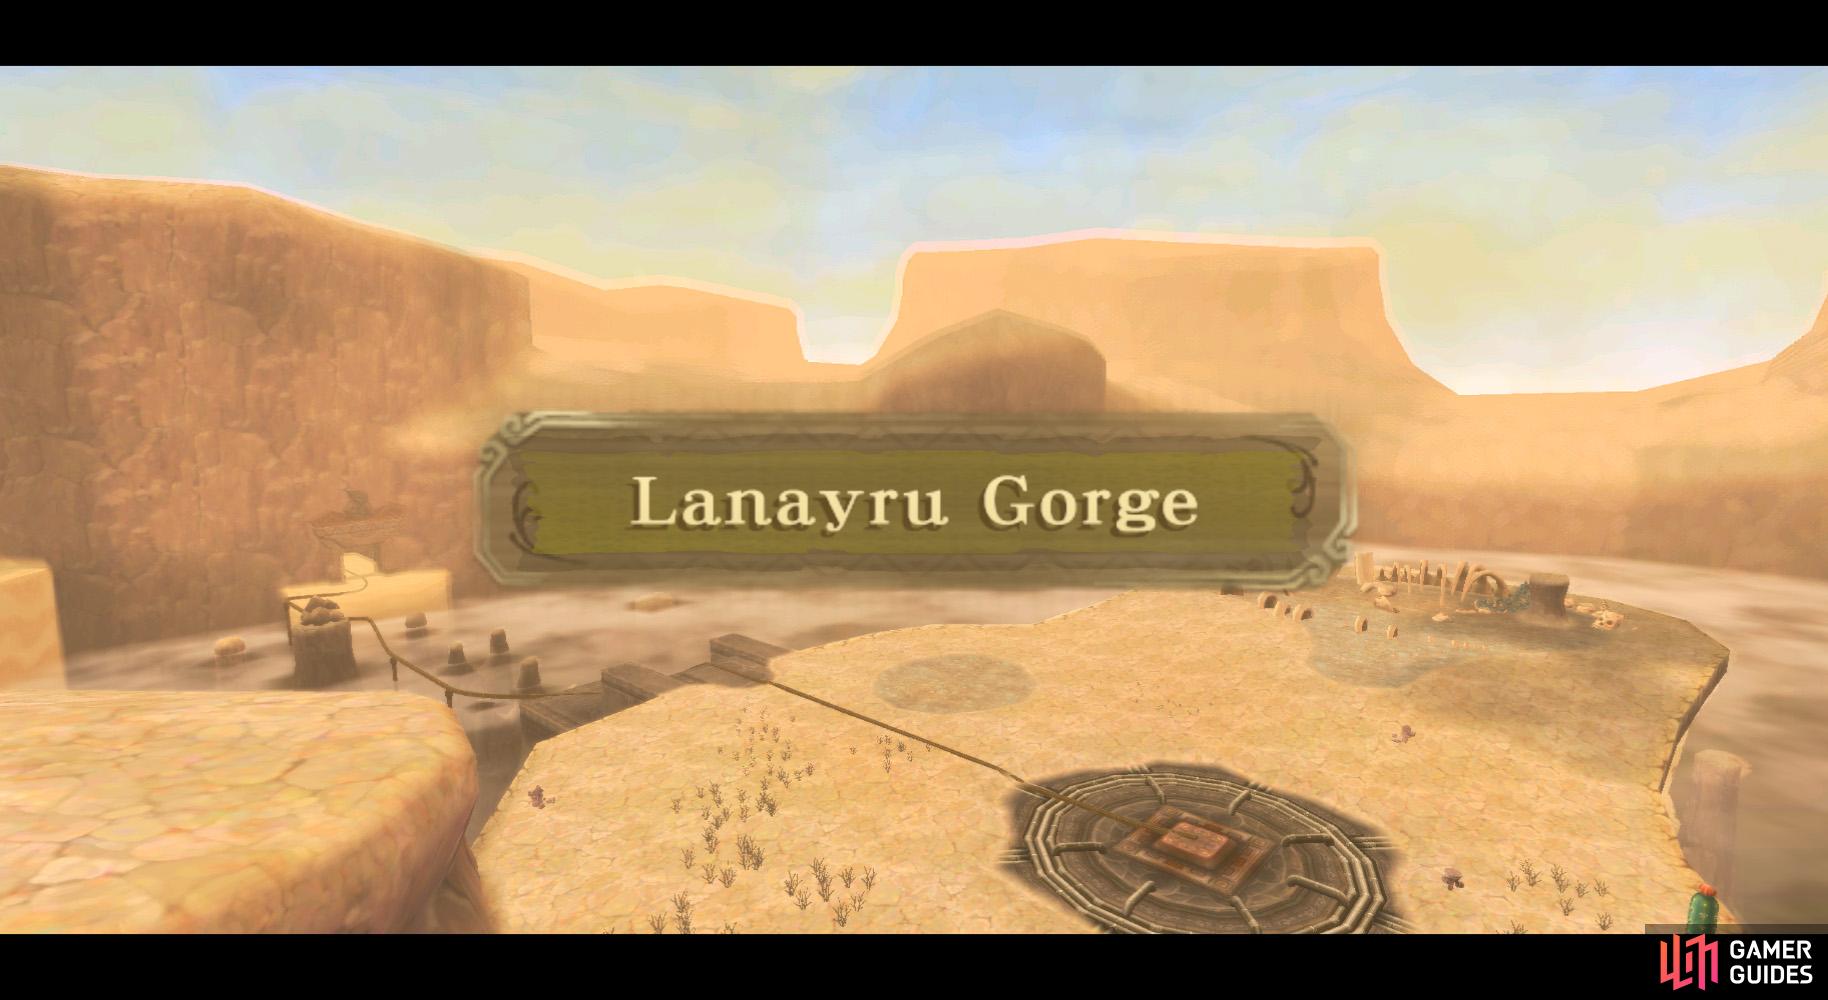 Lanayru Gorge is the last new area in the game.